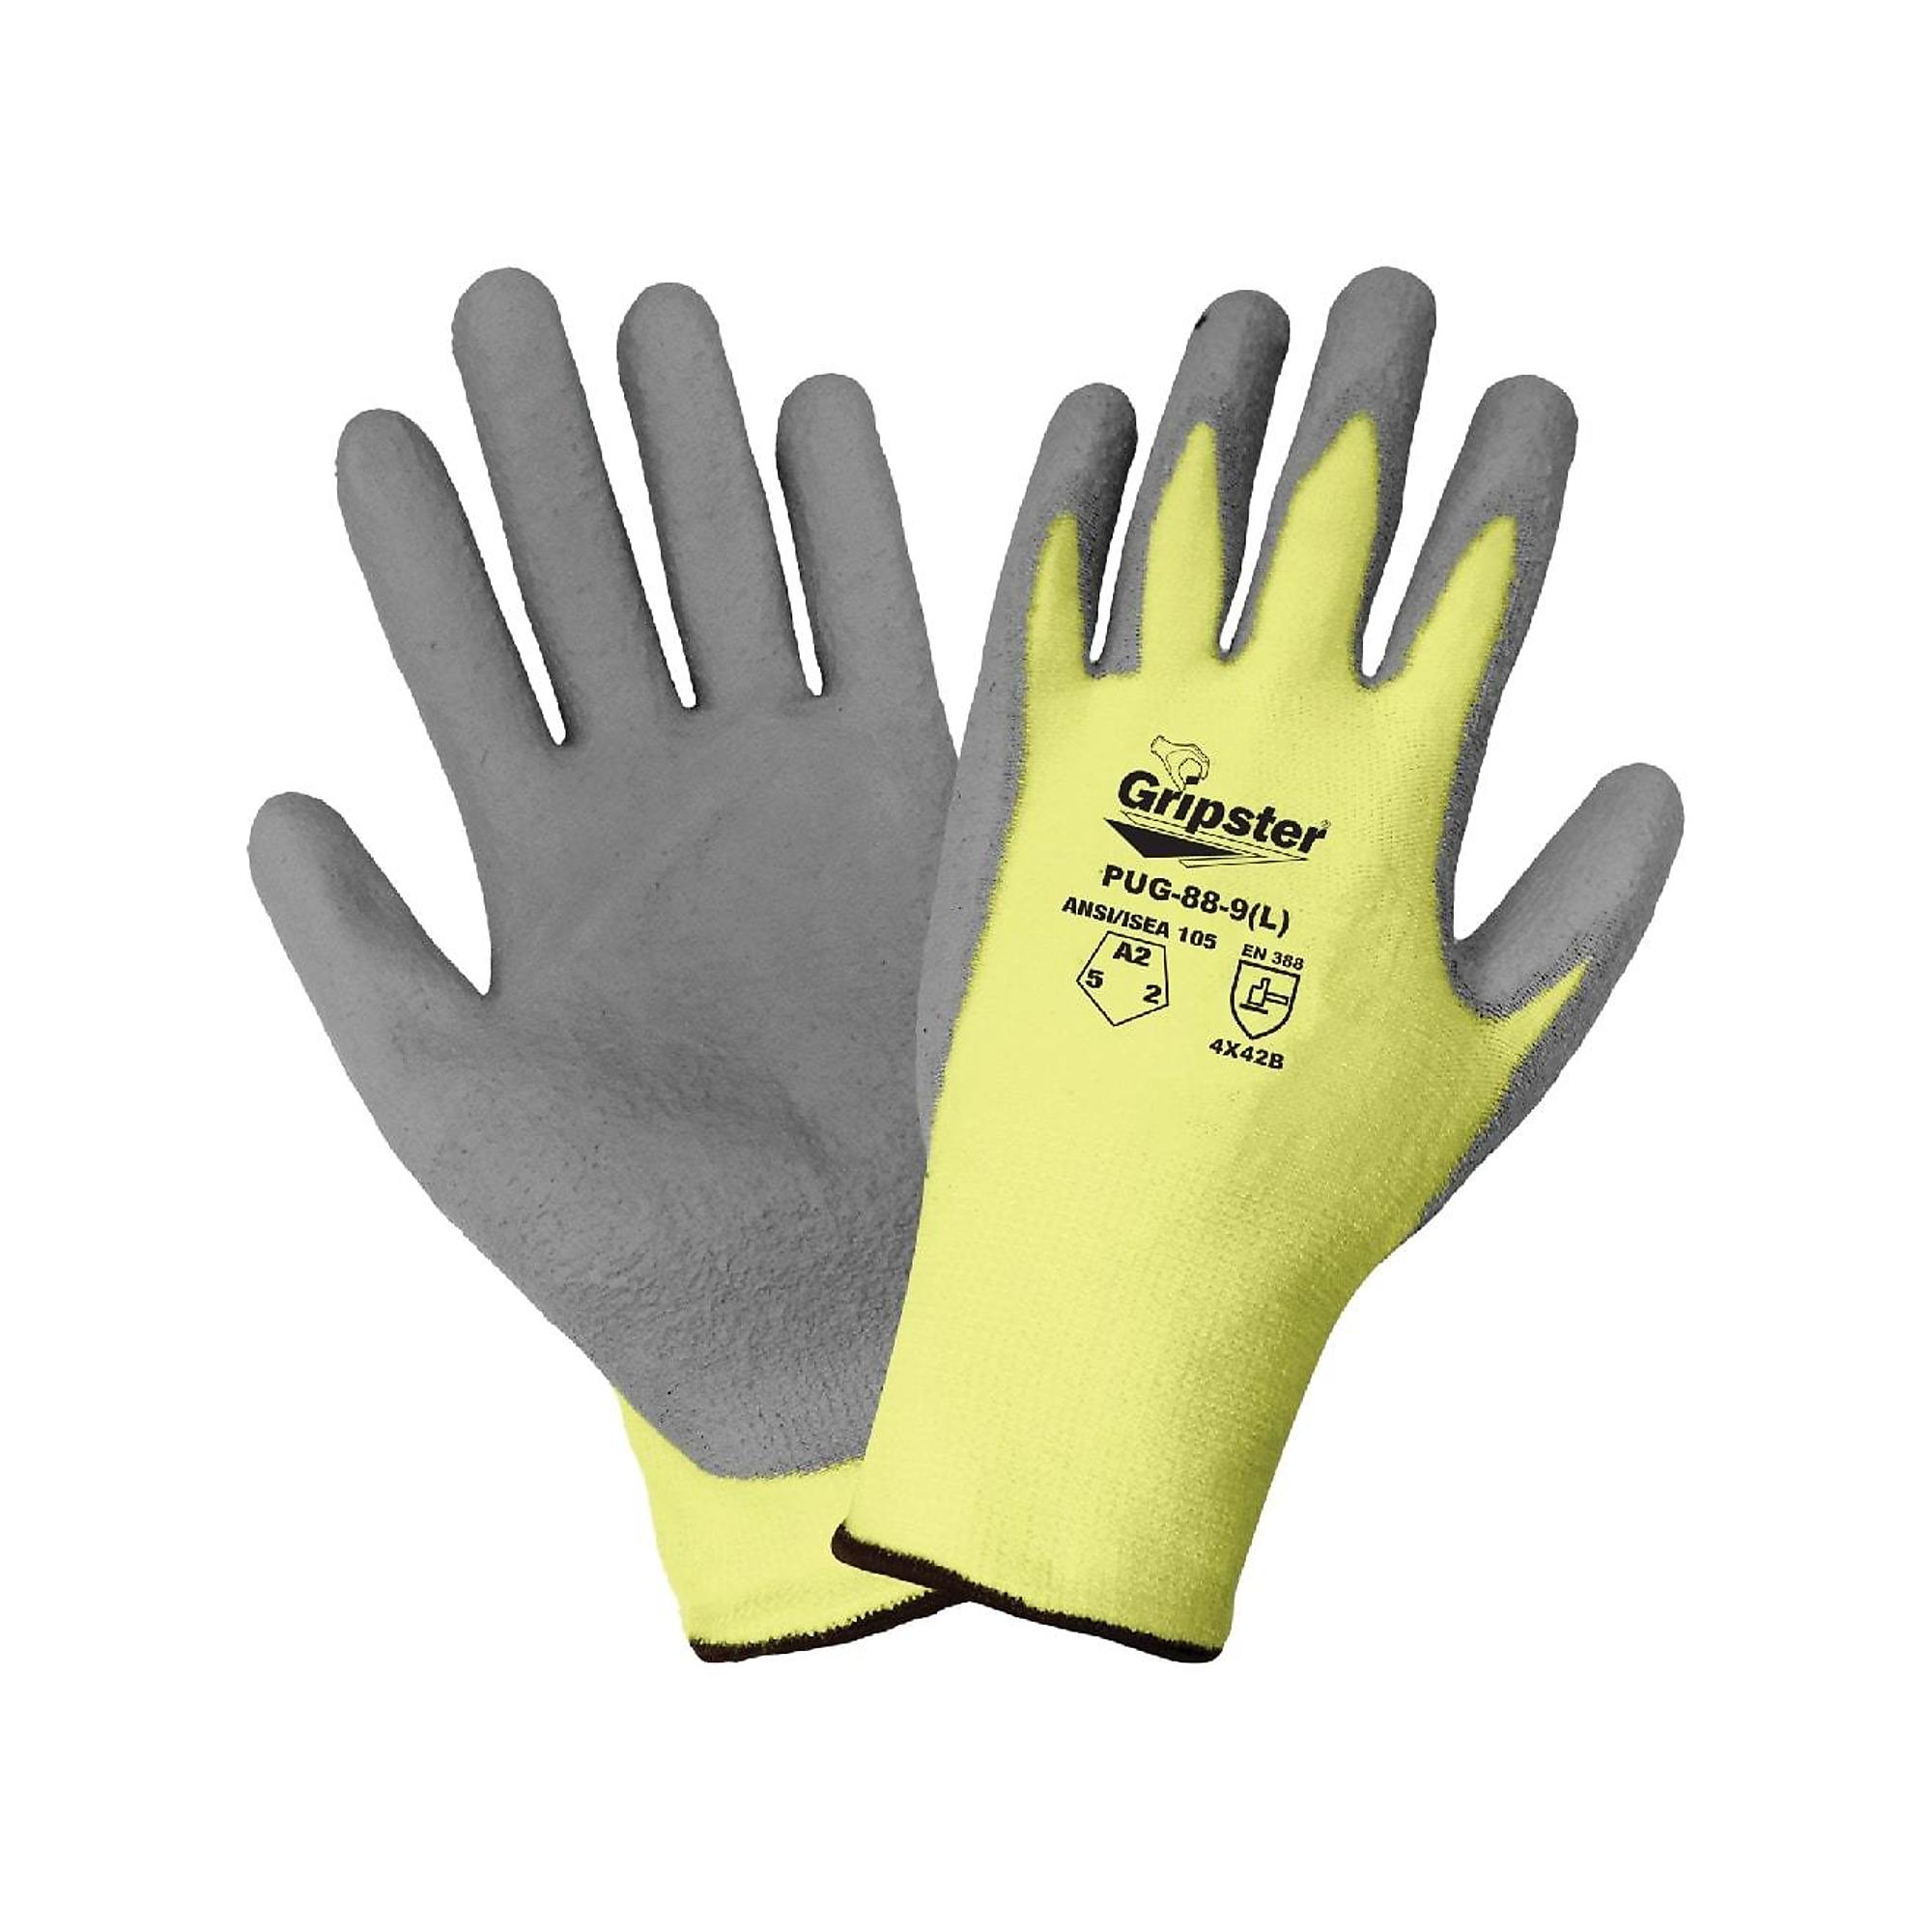 Global Glove Gripster , Yellow, Poly Coated, Cut Resistant A2 Gloves - 12 Pairs, Size S, Color Yellow/Gray, Included (qty.) 12 Model PUG-88-7(S)